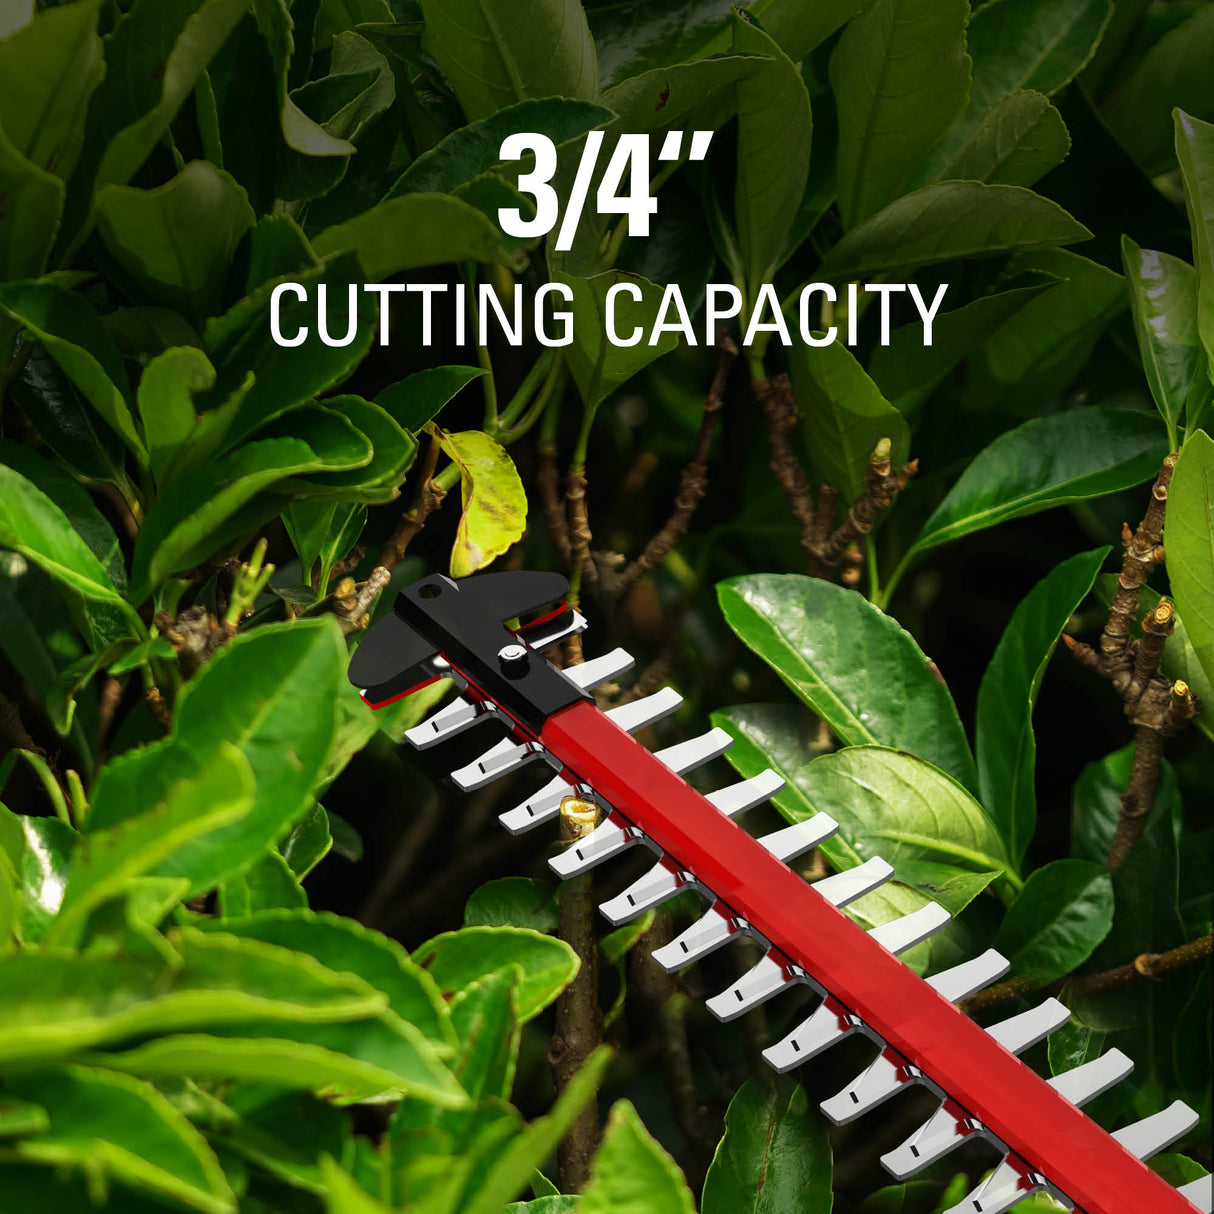 80V 26" Hedge Trimmer (Tool Only) - GHT80320